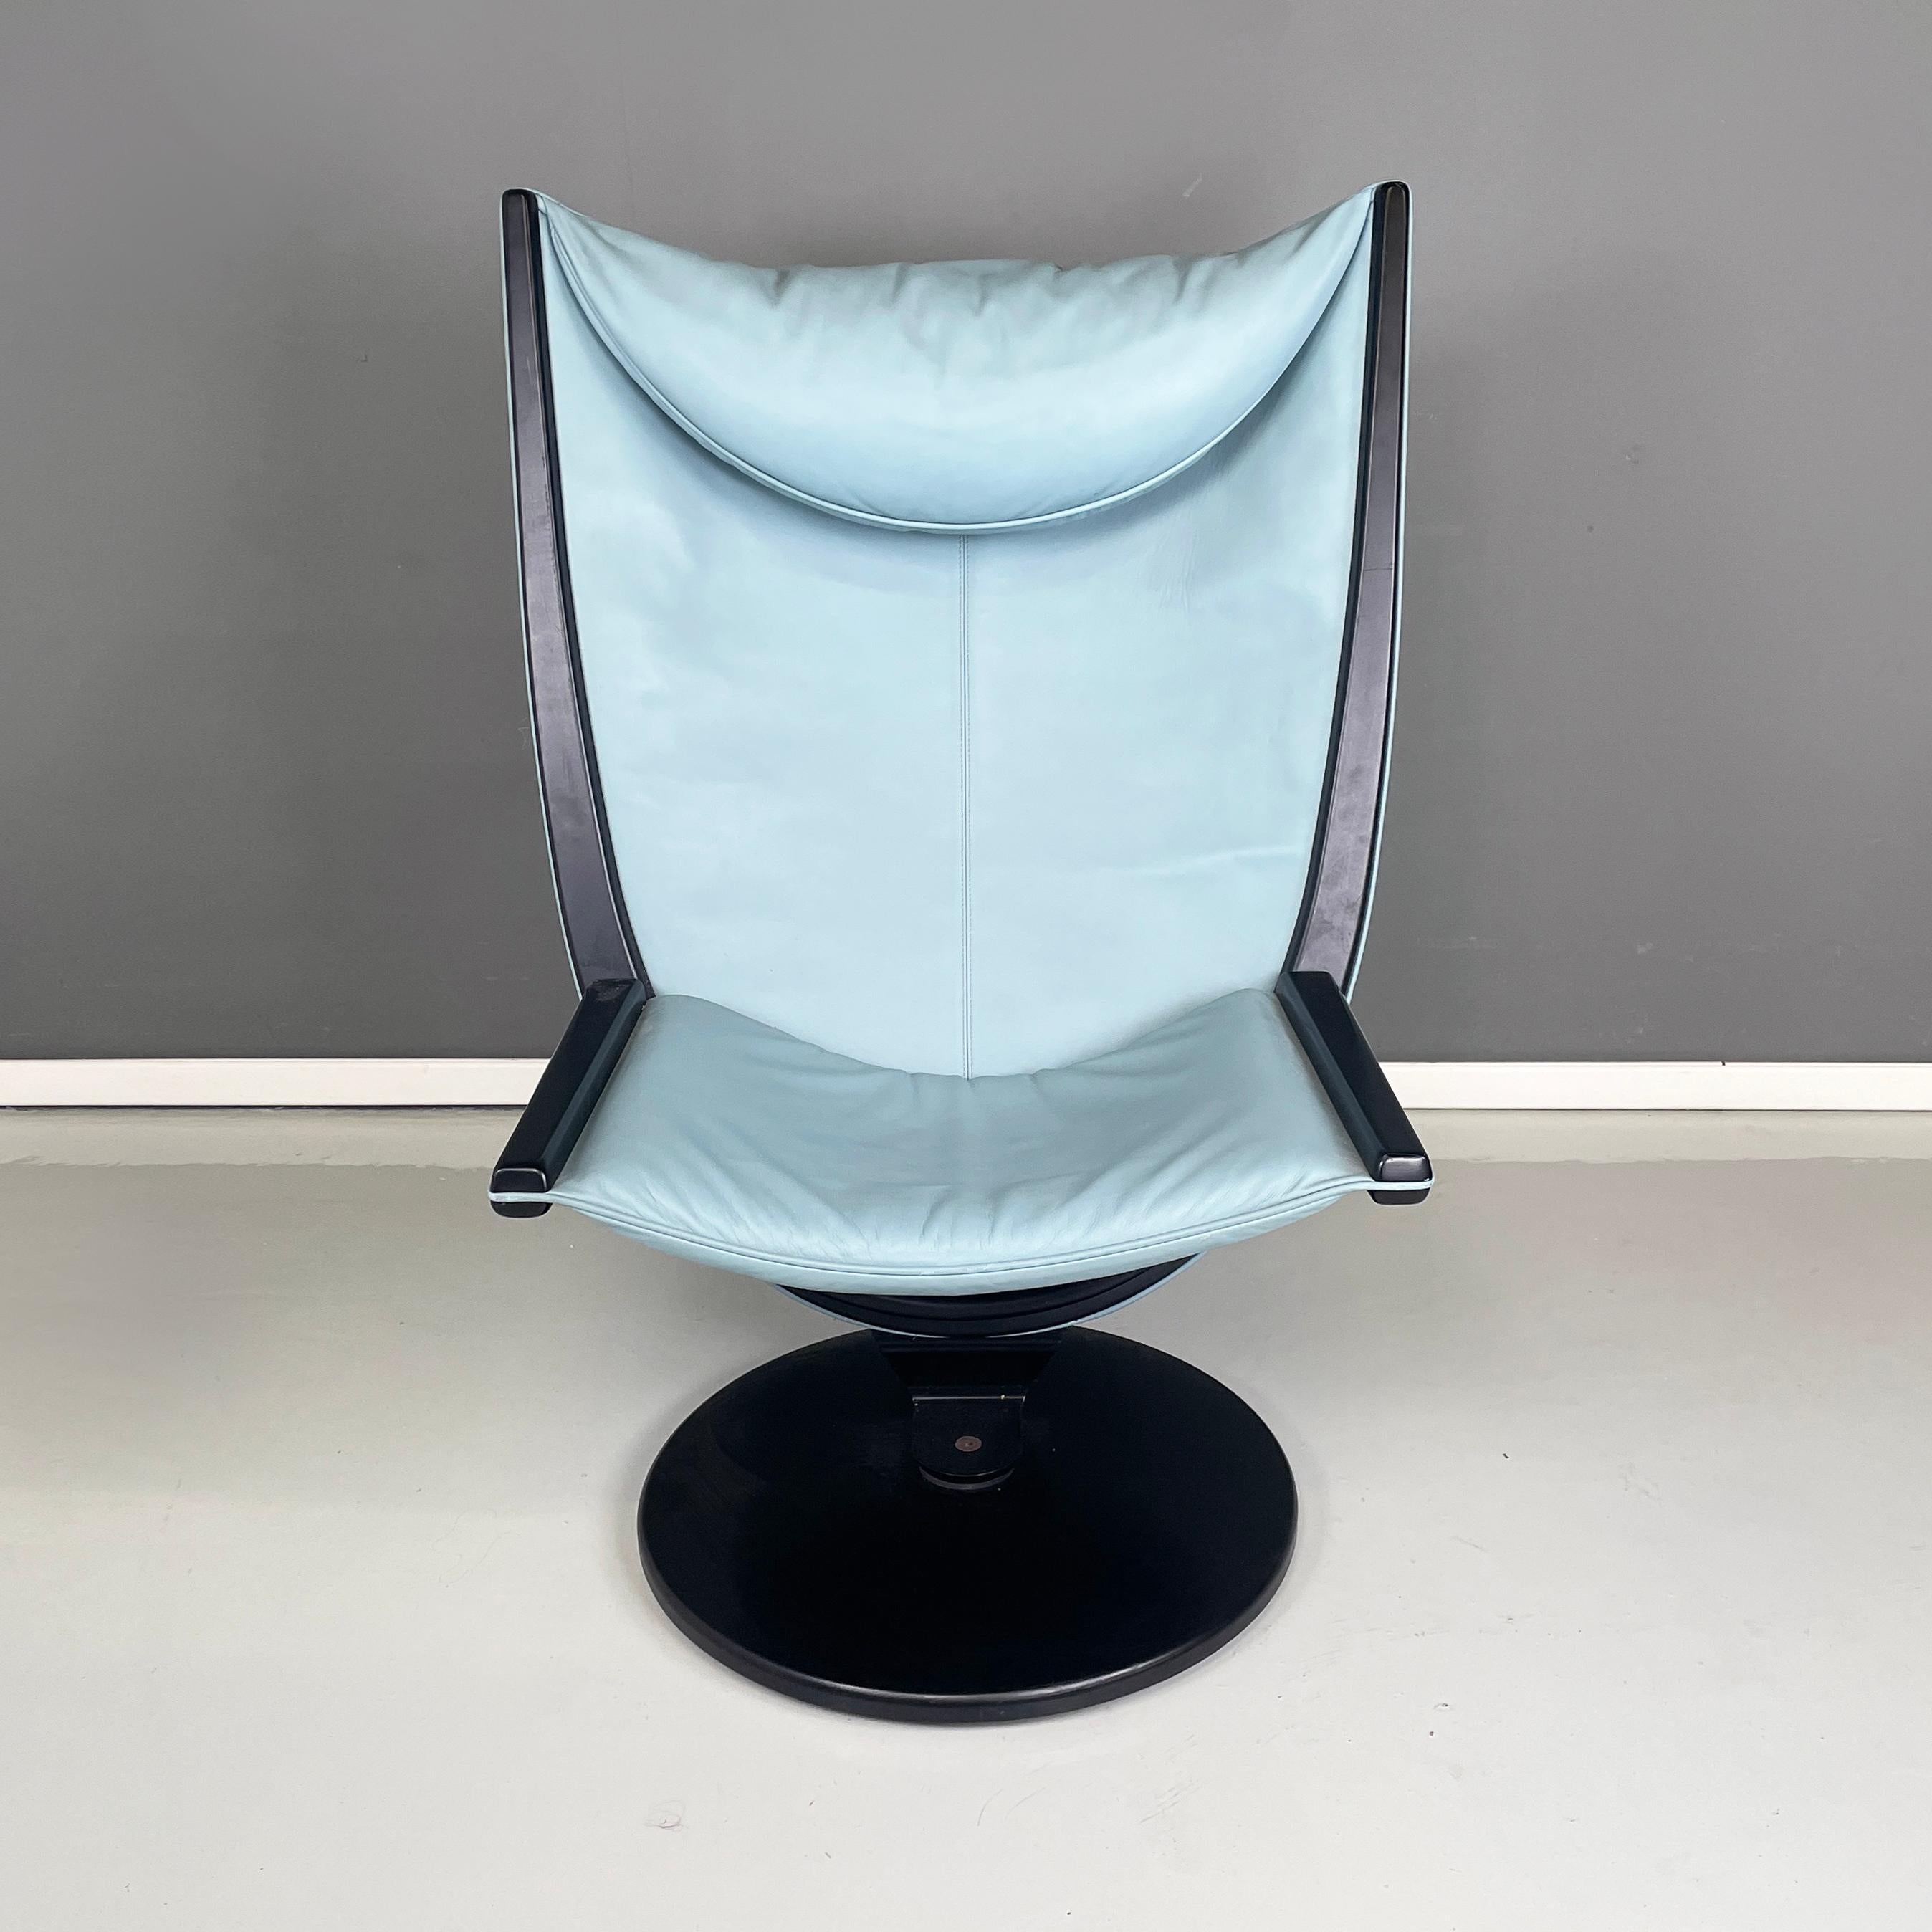 Italian space age modern light blue leather black wood Armchair by Westnofa, 1980s
Armchair with round base in black painted wood. The armchair has back and seat, padded and covered on the front in tiffany blue leather and on the back in black